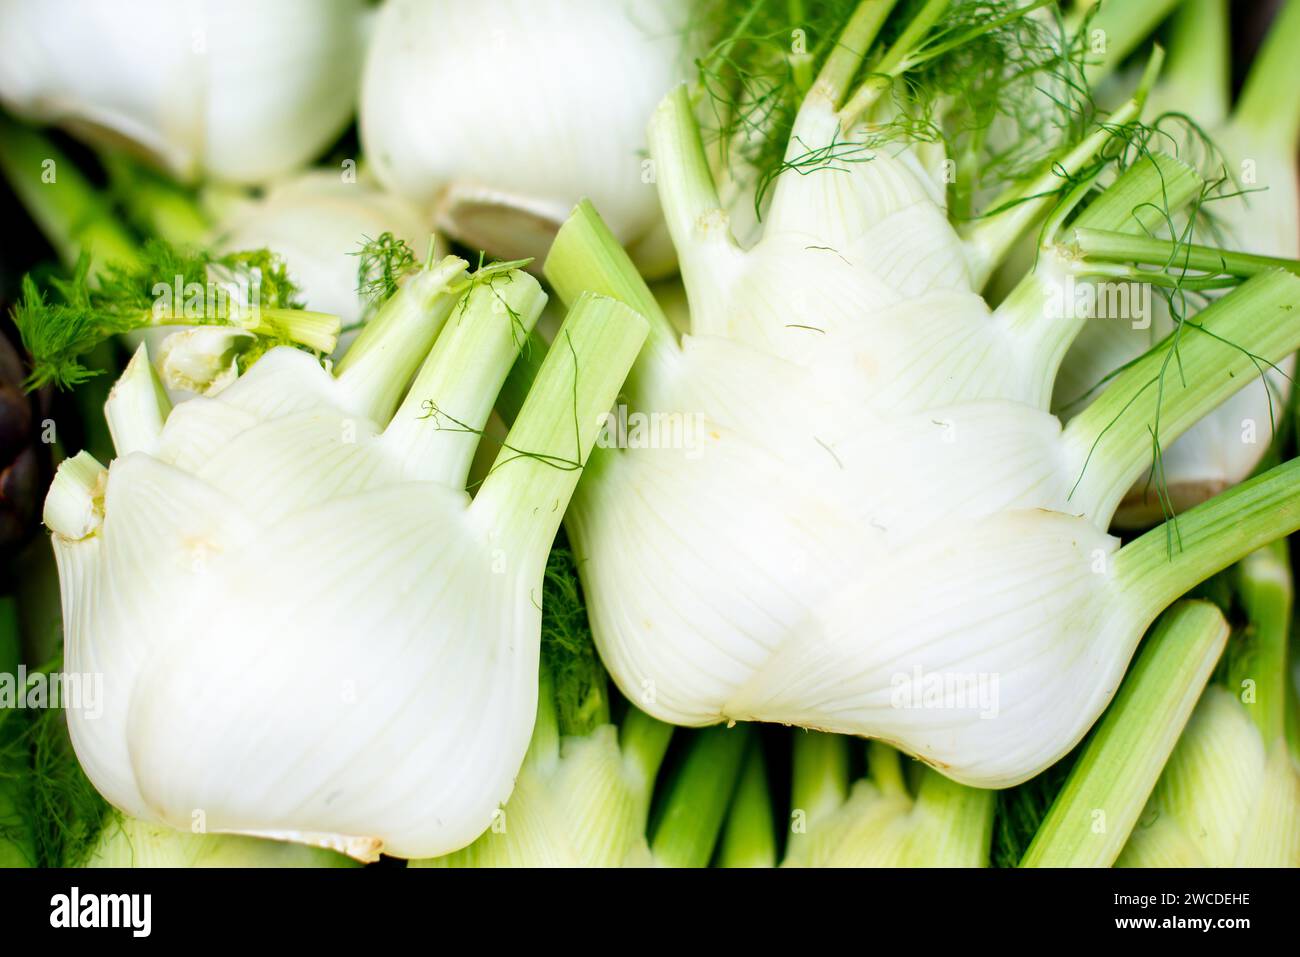 A detailed close-up photograph capturing a vibrant array of lush green fennels neatly arranged on a table Stock Photo